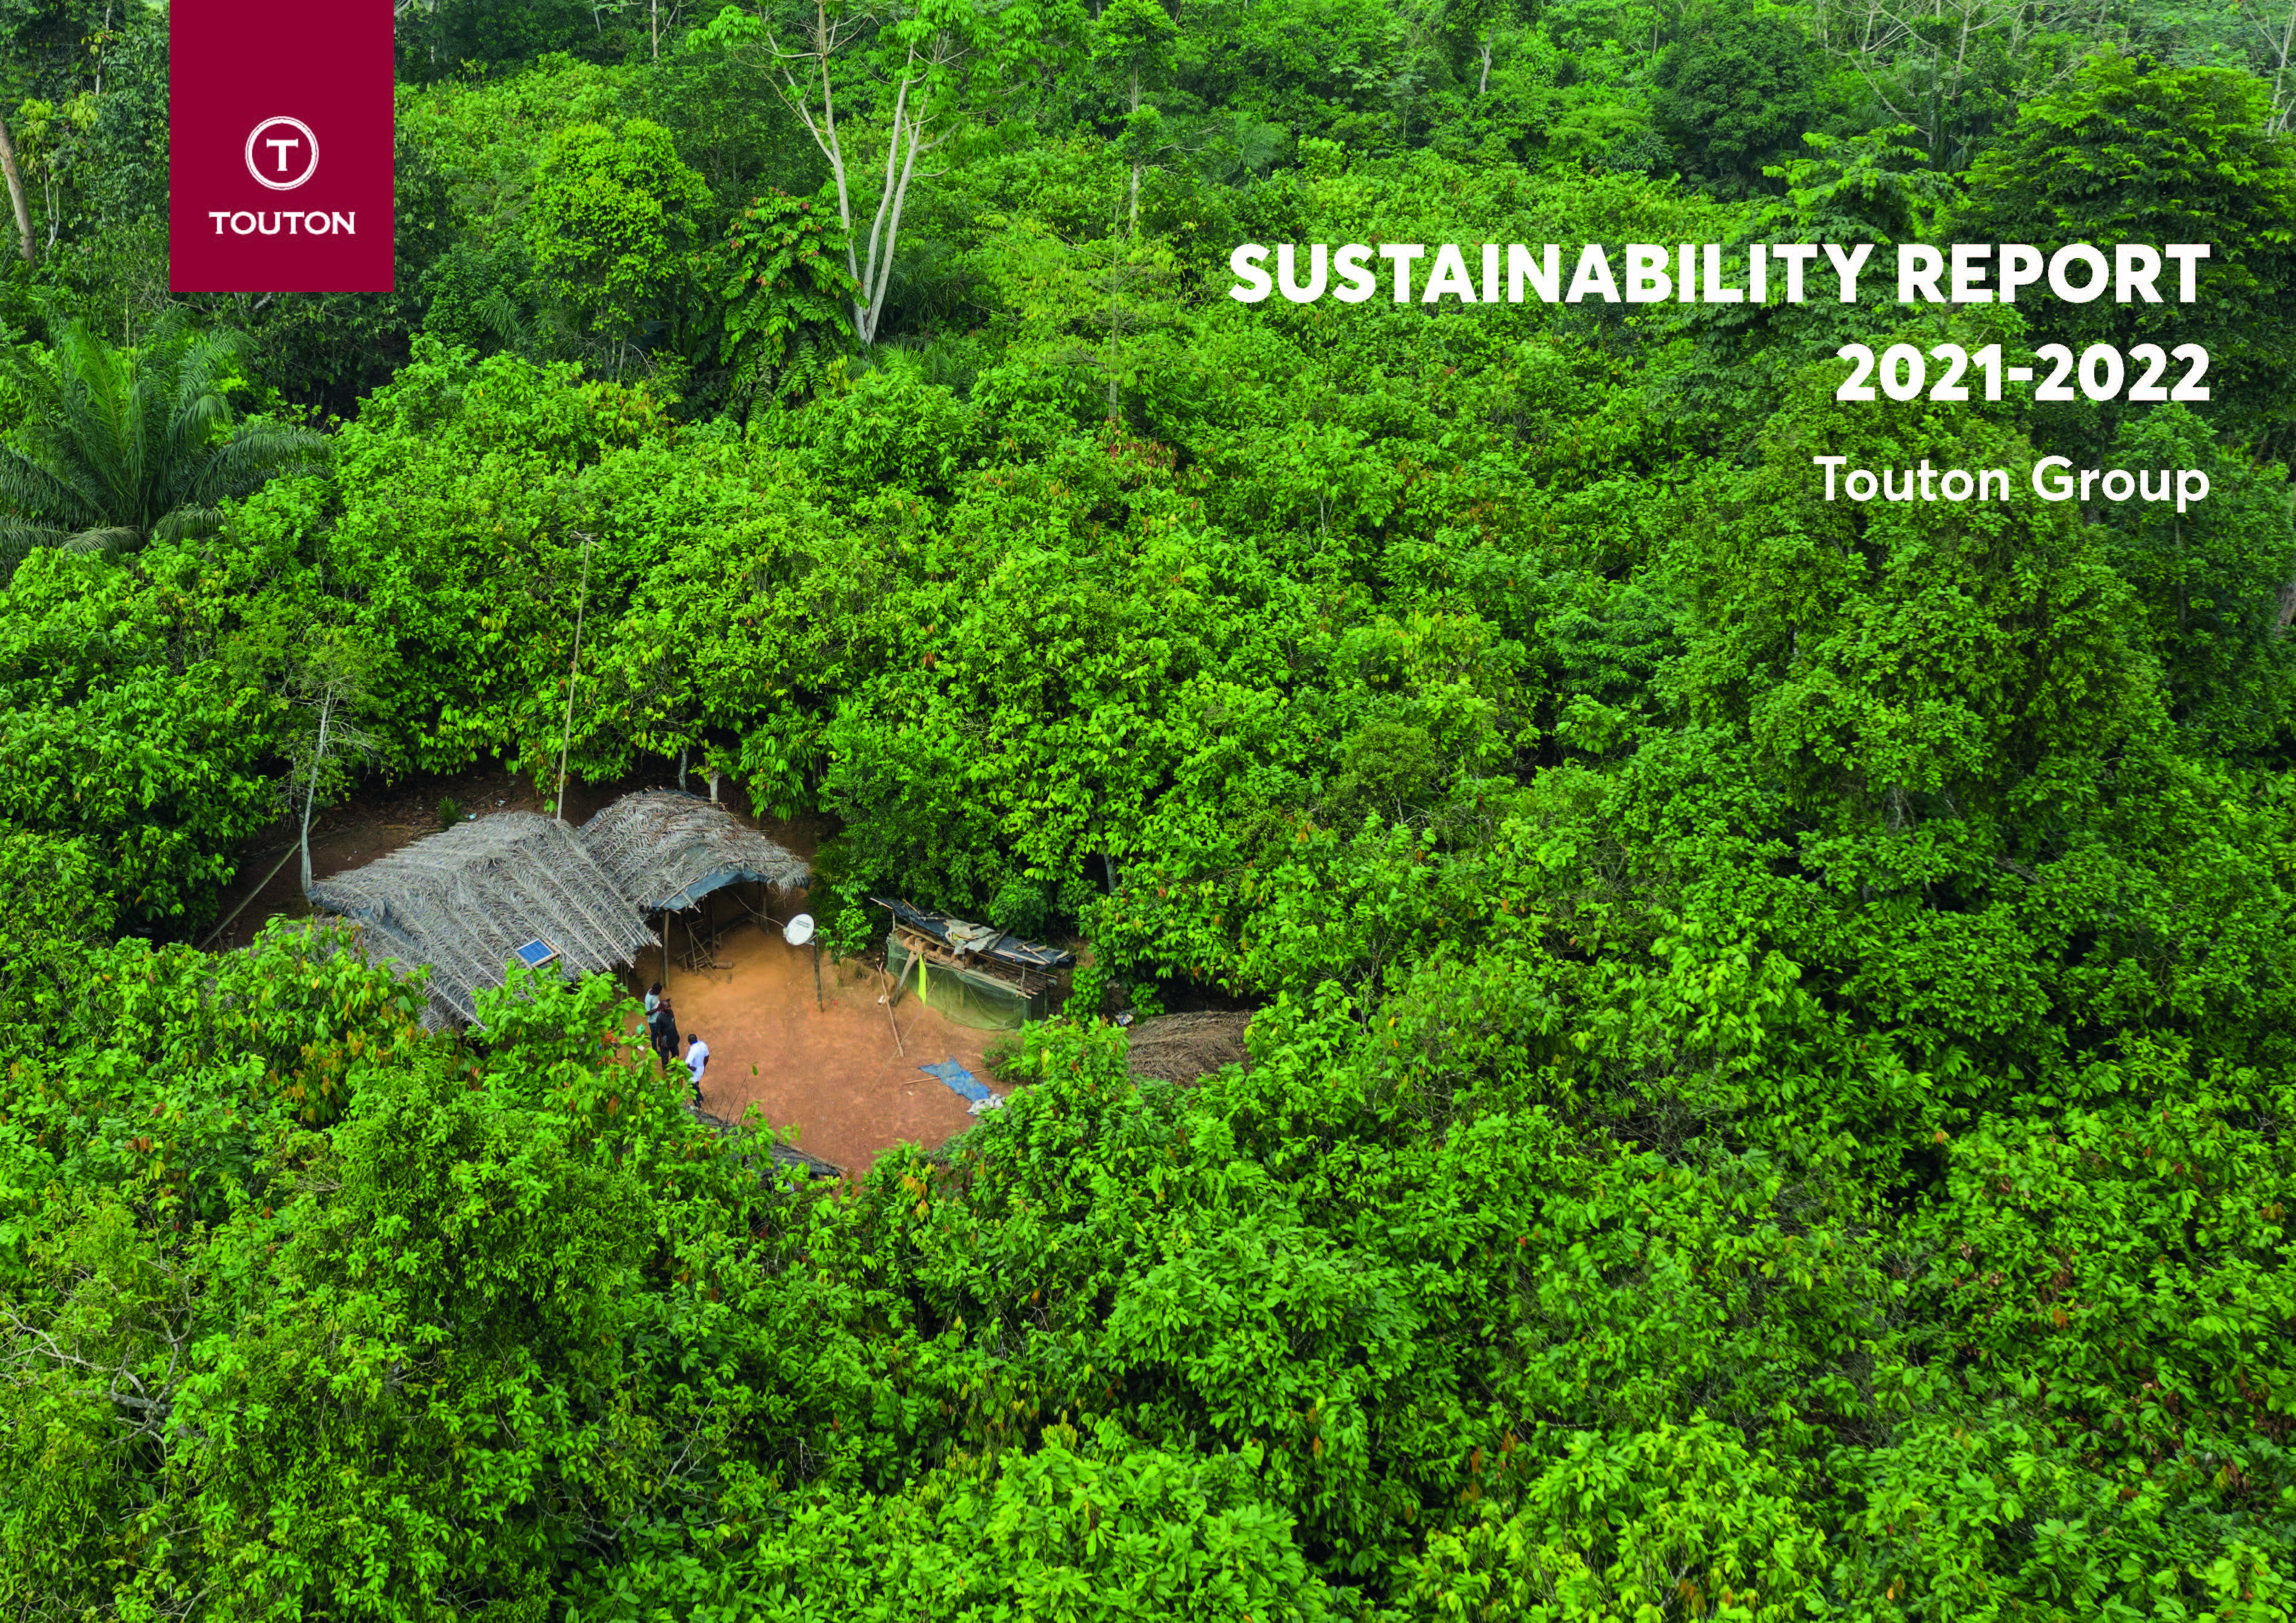 Reelase of the Sustainability report 2021-2022!